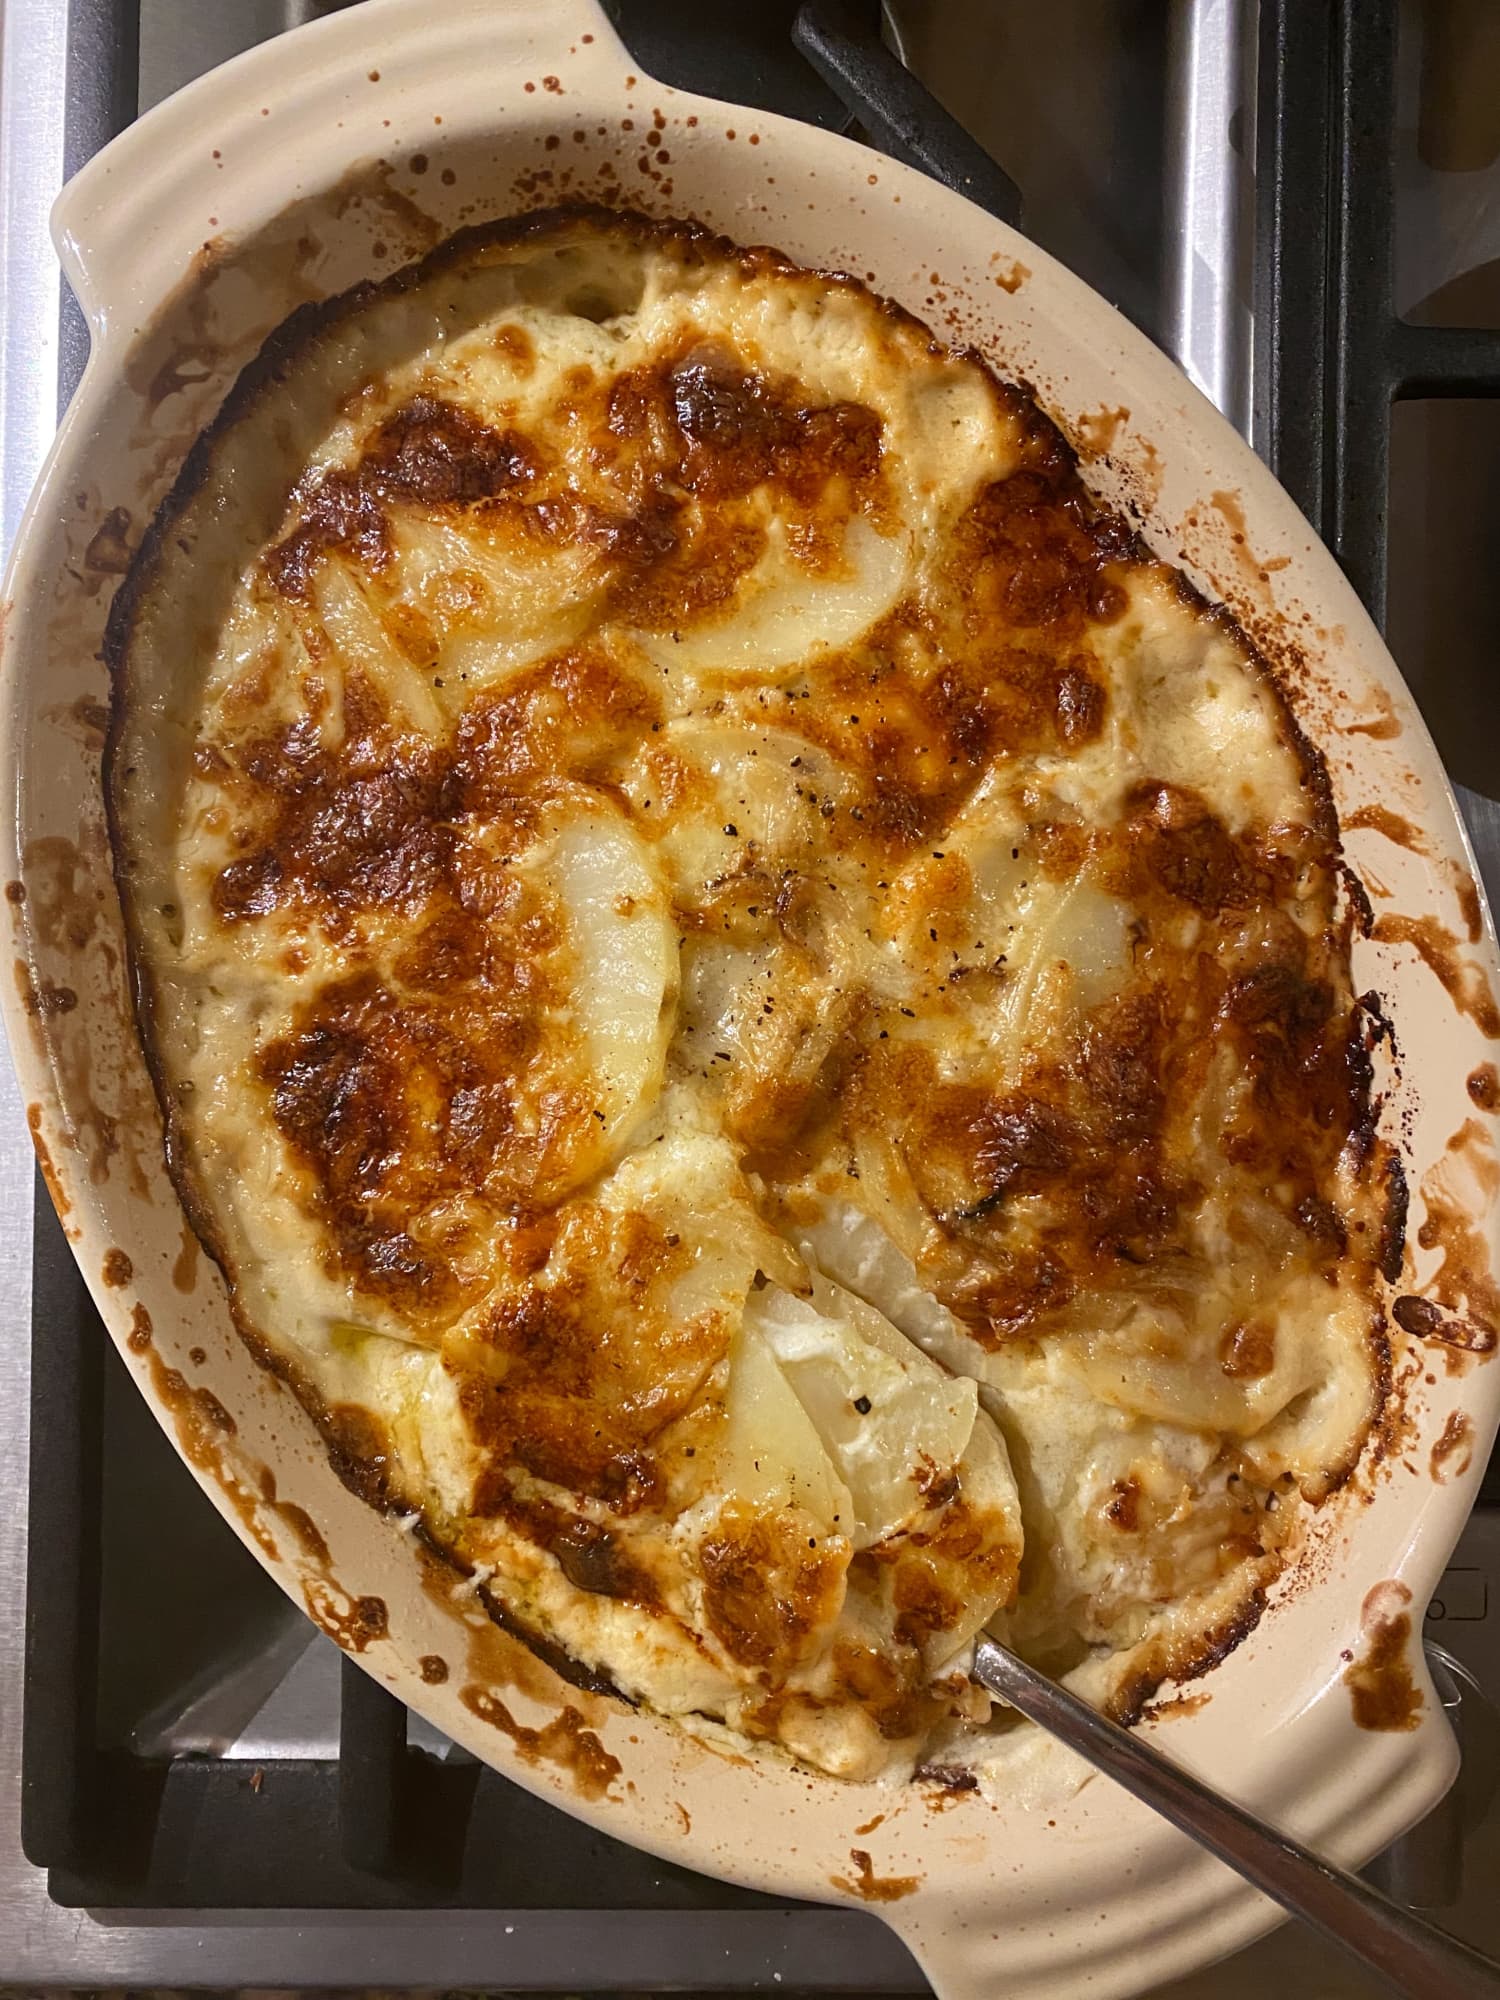 Ina Garten Recipes/Scalloped Potatoes : scalloped potatoes ina garten : Mix the sliced potatoes in a large bowl with 2 cups of cream, 2 cups of gruyère.